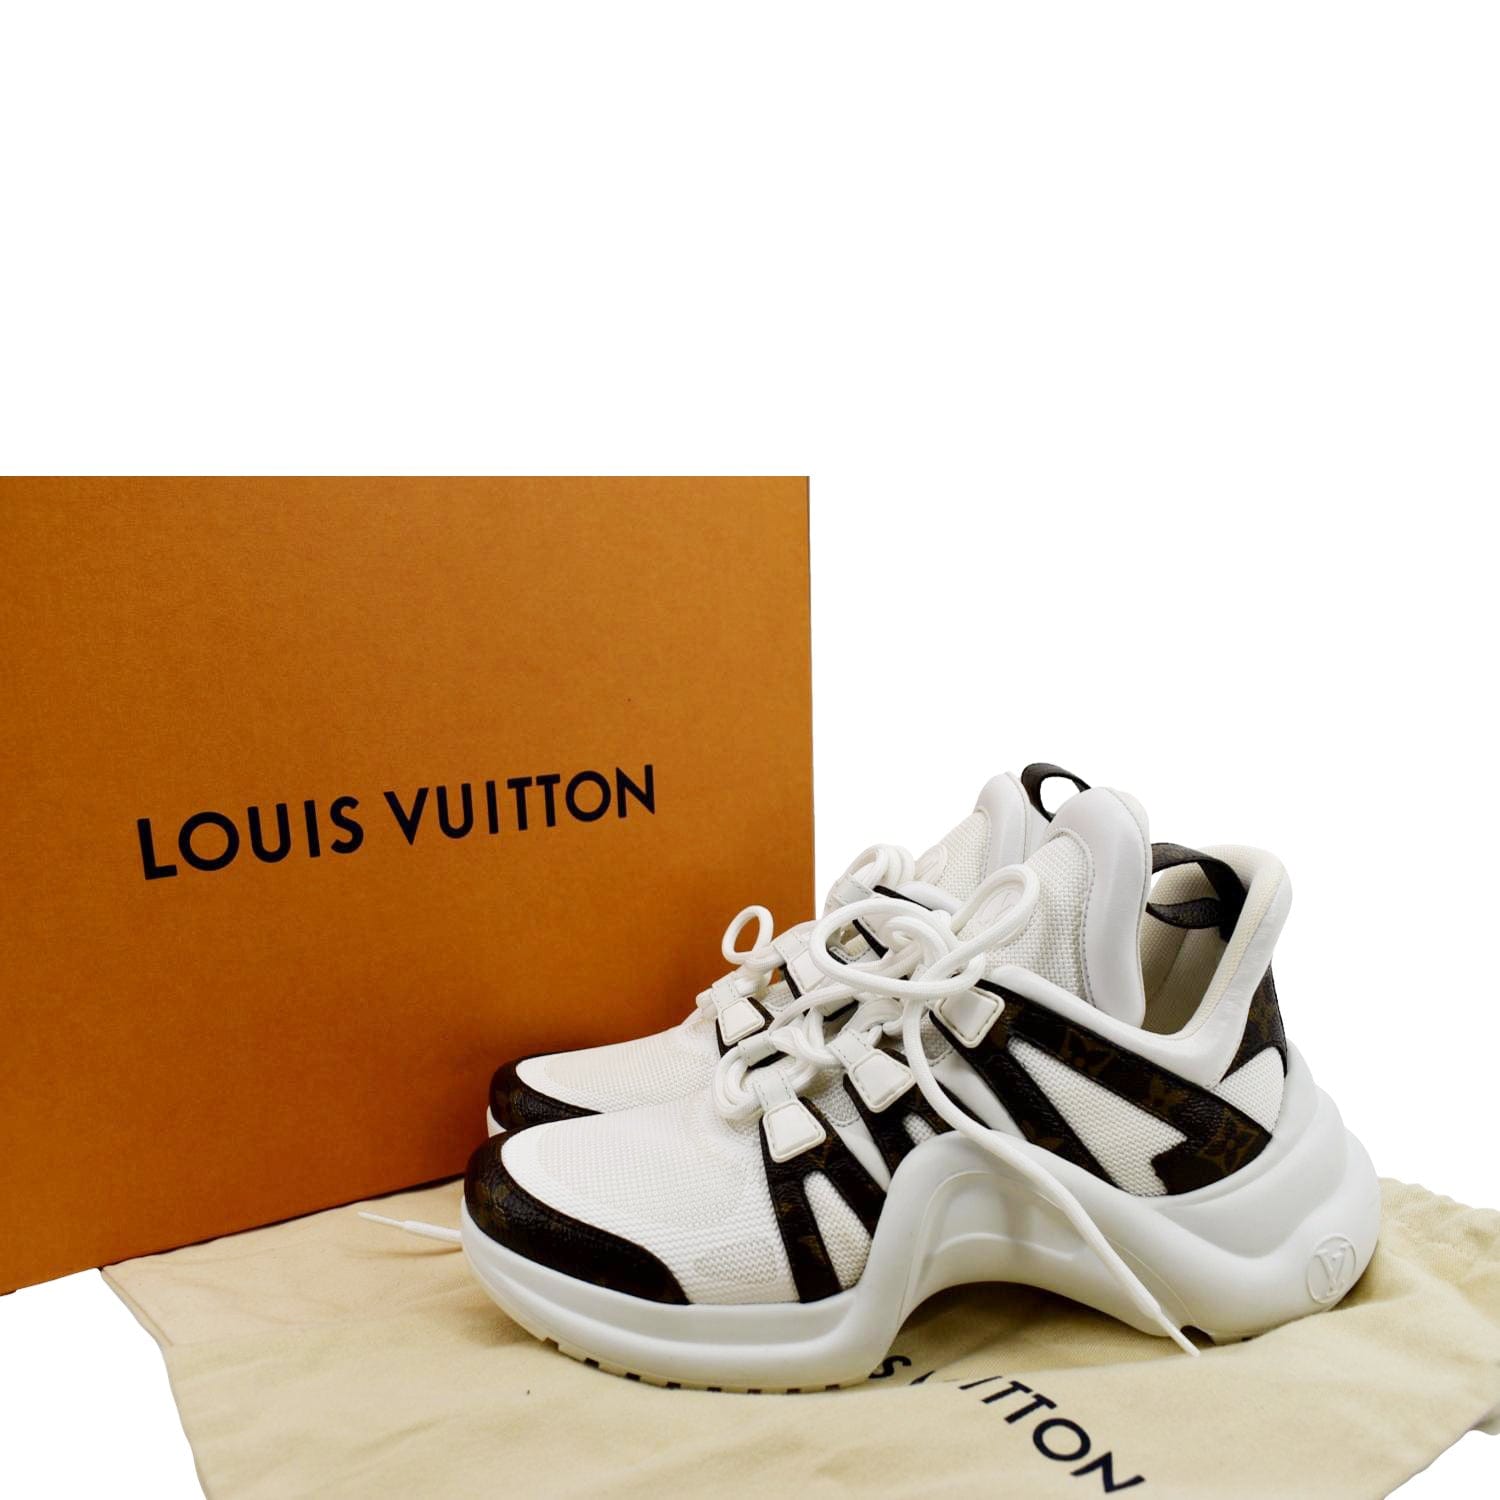 Louis Vuitton Archlight Sneakers Brown